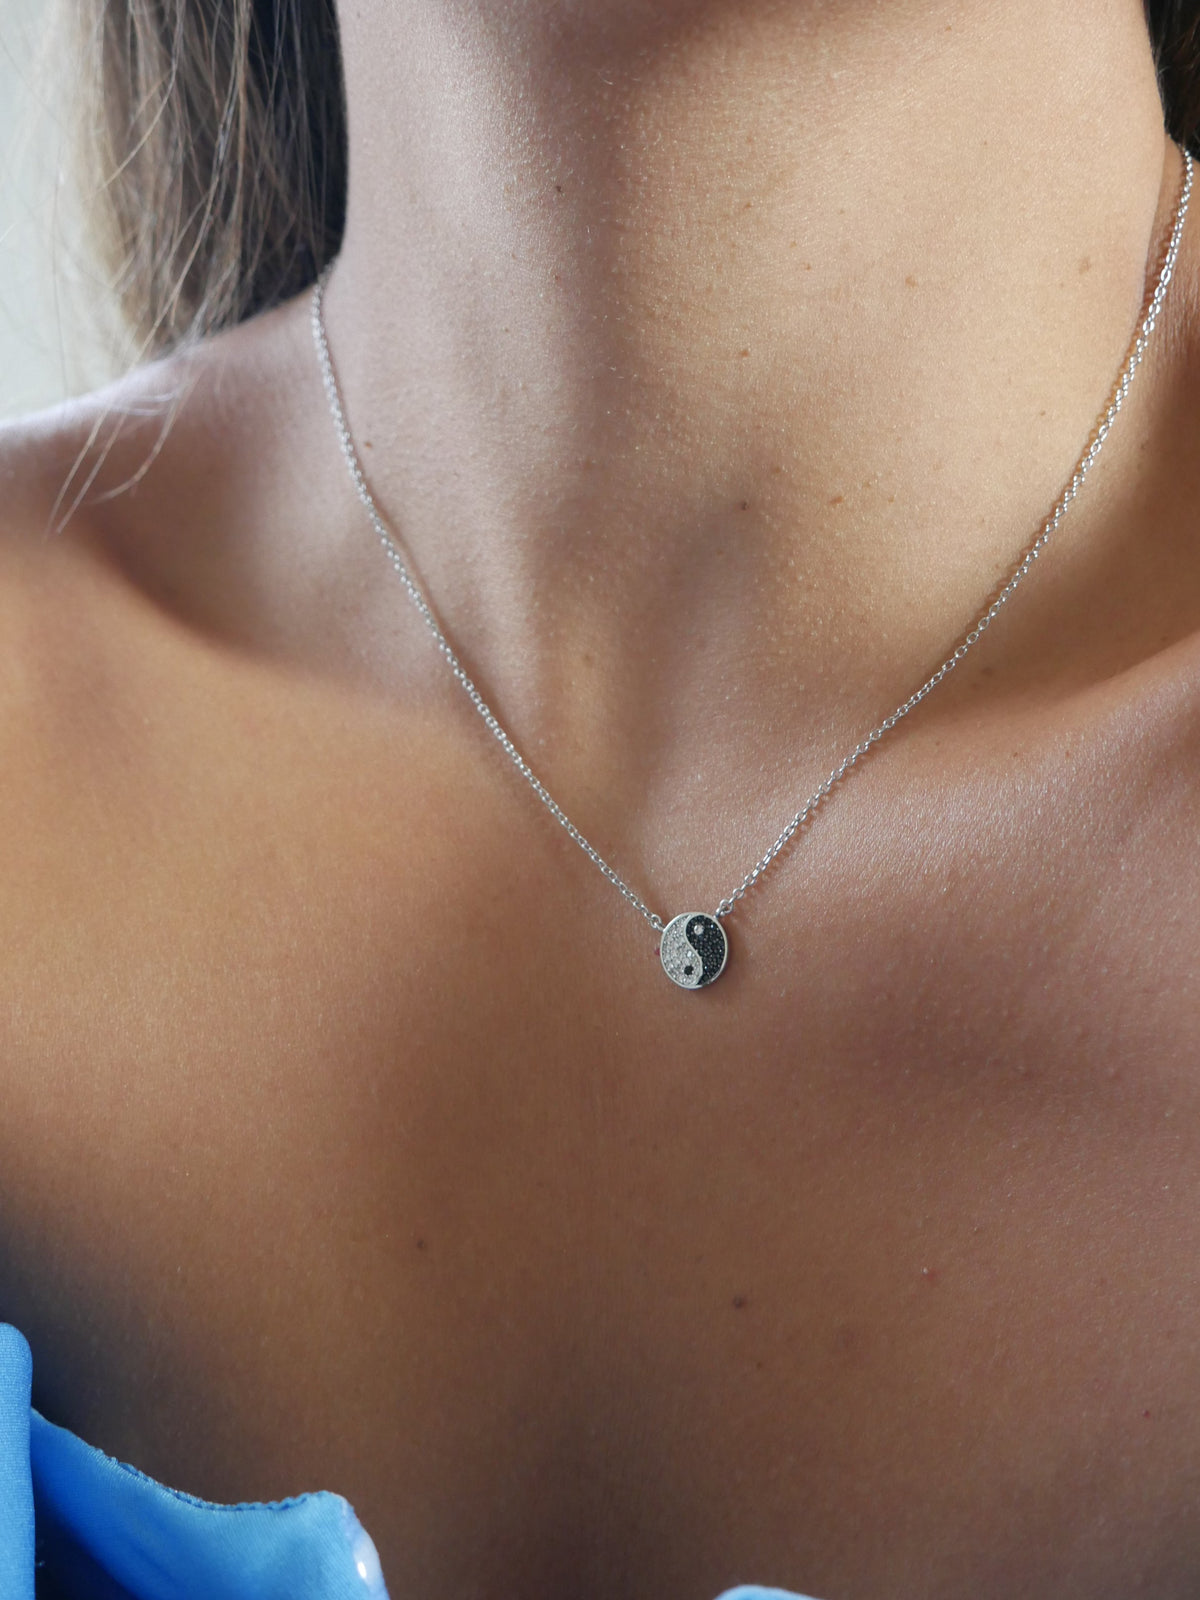 necklaces, dainty, sterling silver, .925, yin yang, designer popular luxury necklaces, trending, influencer style, cute accessories, gift ideas, anniversary, birthday, waterproof, nickel free,  unique necklaces, hypoallergenic, opposites attract, zodiac necklaces, horoscope necklaces, black and white jewelry, 